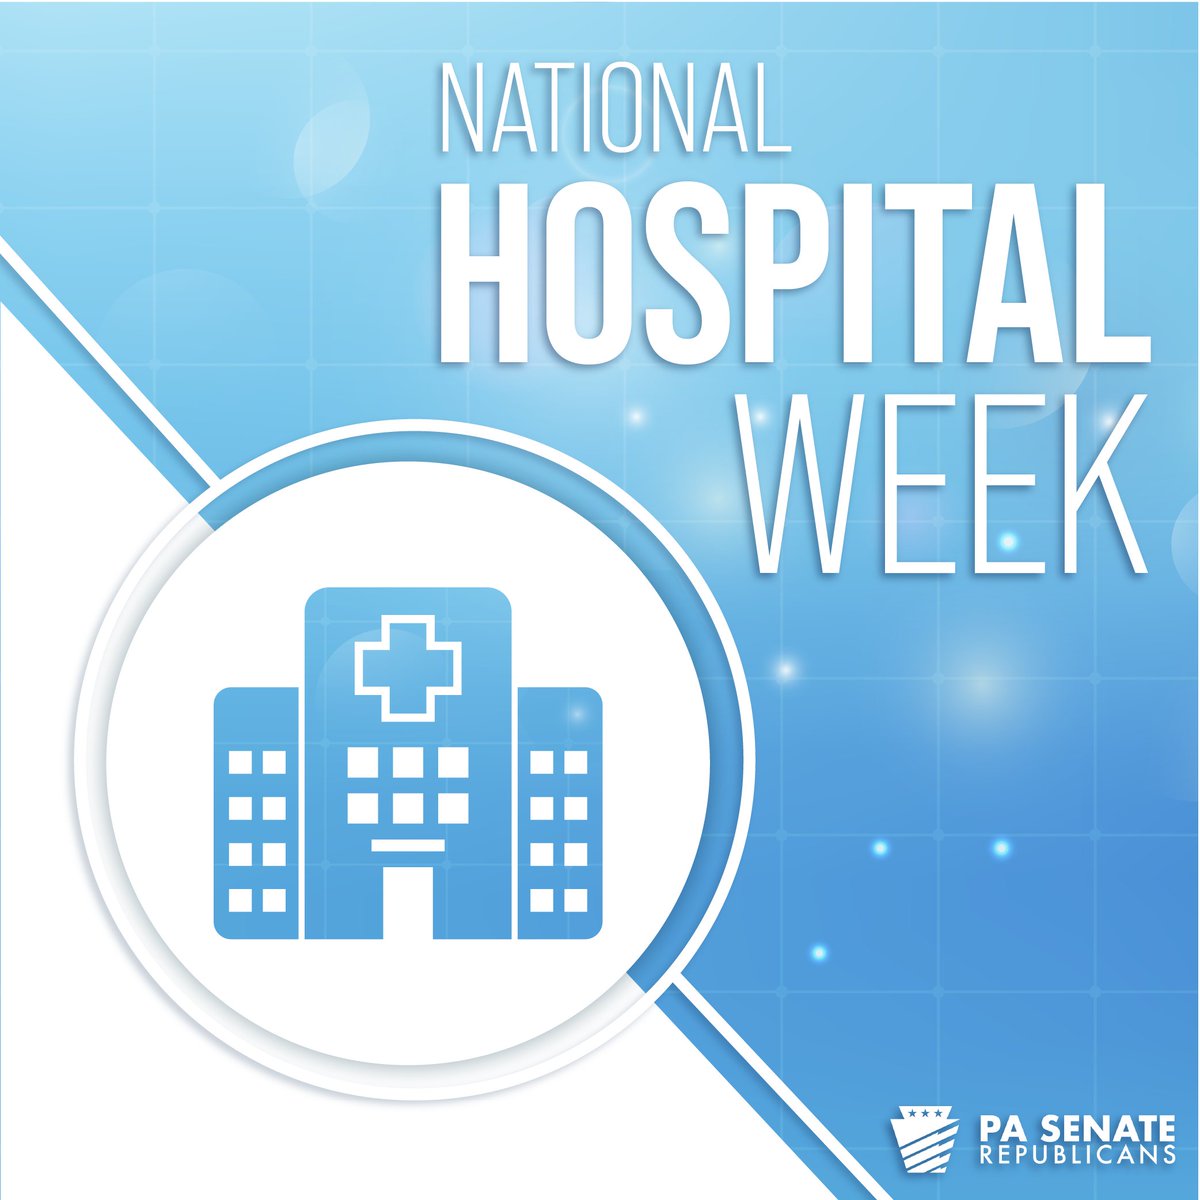 This is #NationalHospitalWeek! We thank #PAHospitals teams for making a difference in our communities, caring for patients, and providing quality care to everyone.